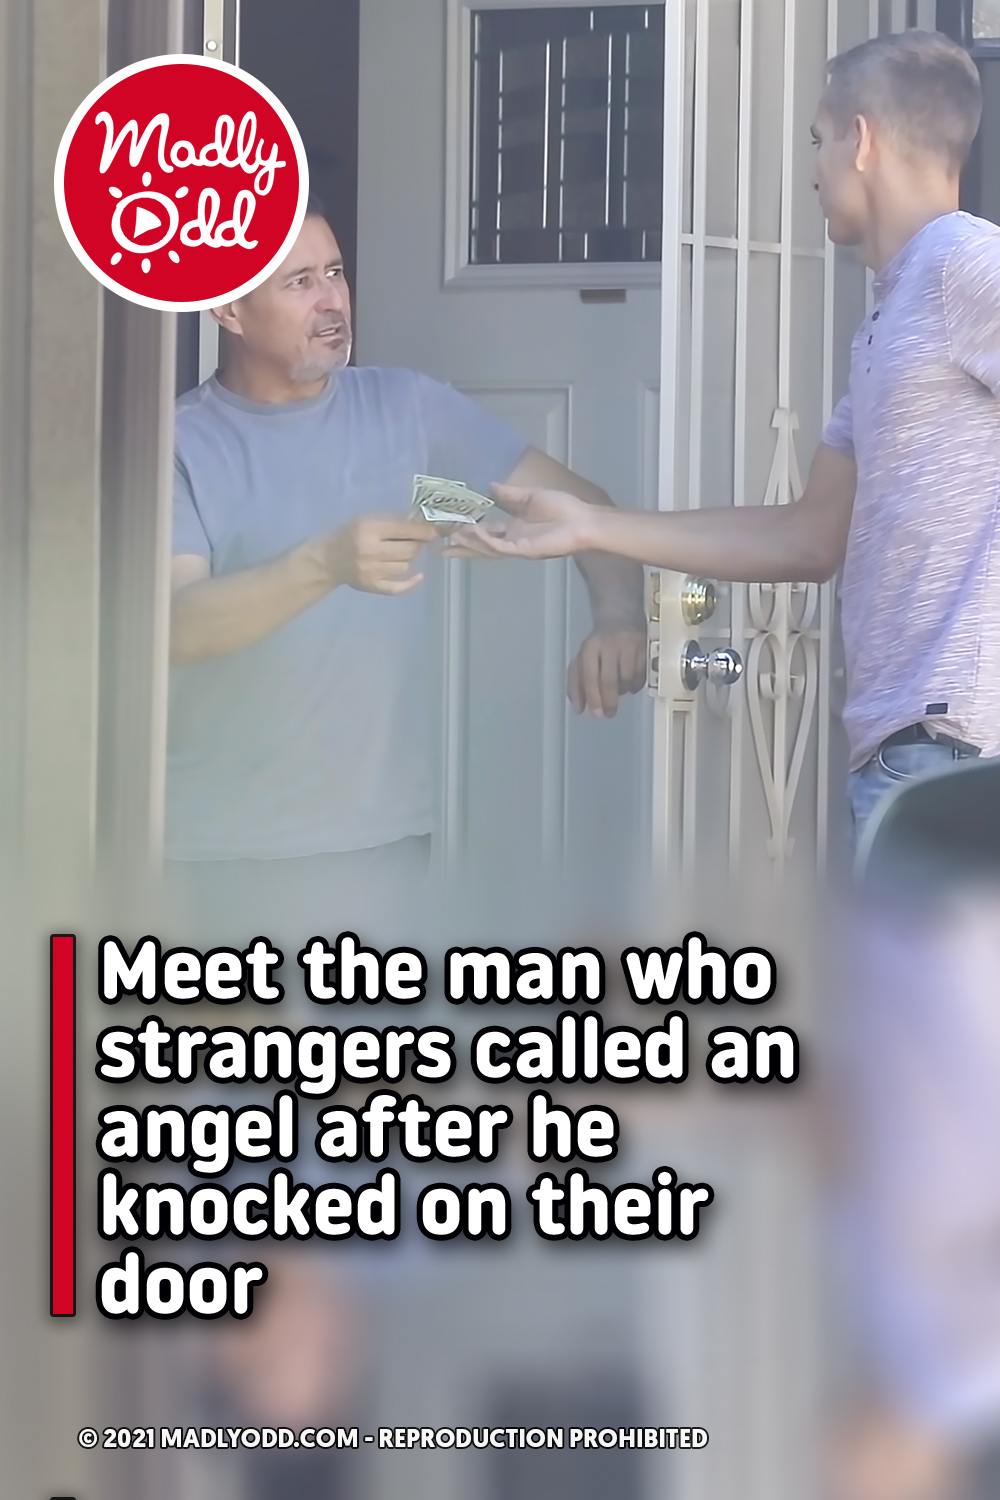 Meet the man who strangers called an angel after he knocked on their door